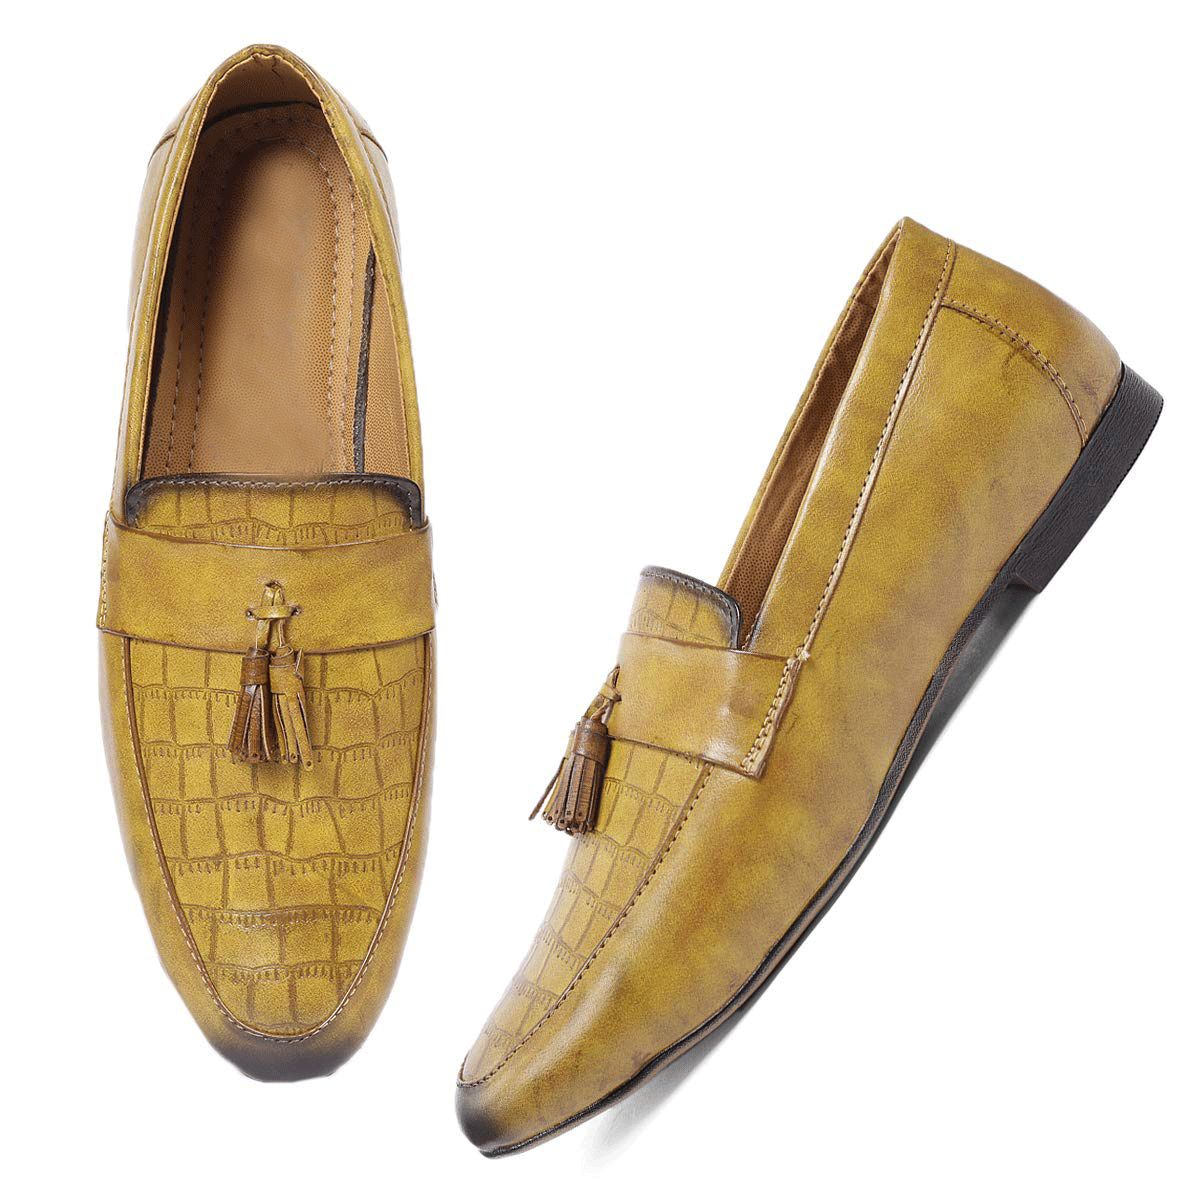 New High Quality Formal For Office And Party Wear Loafer & Moccasins Shoe-JonasParamount